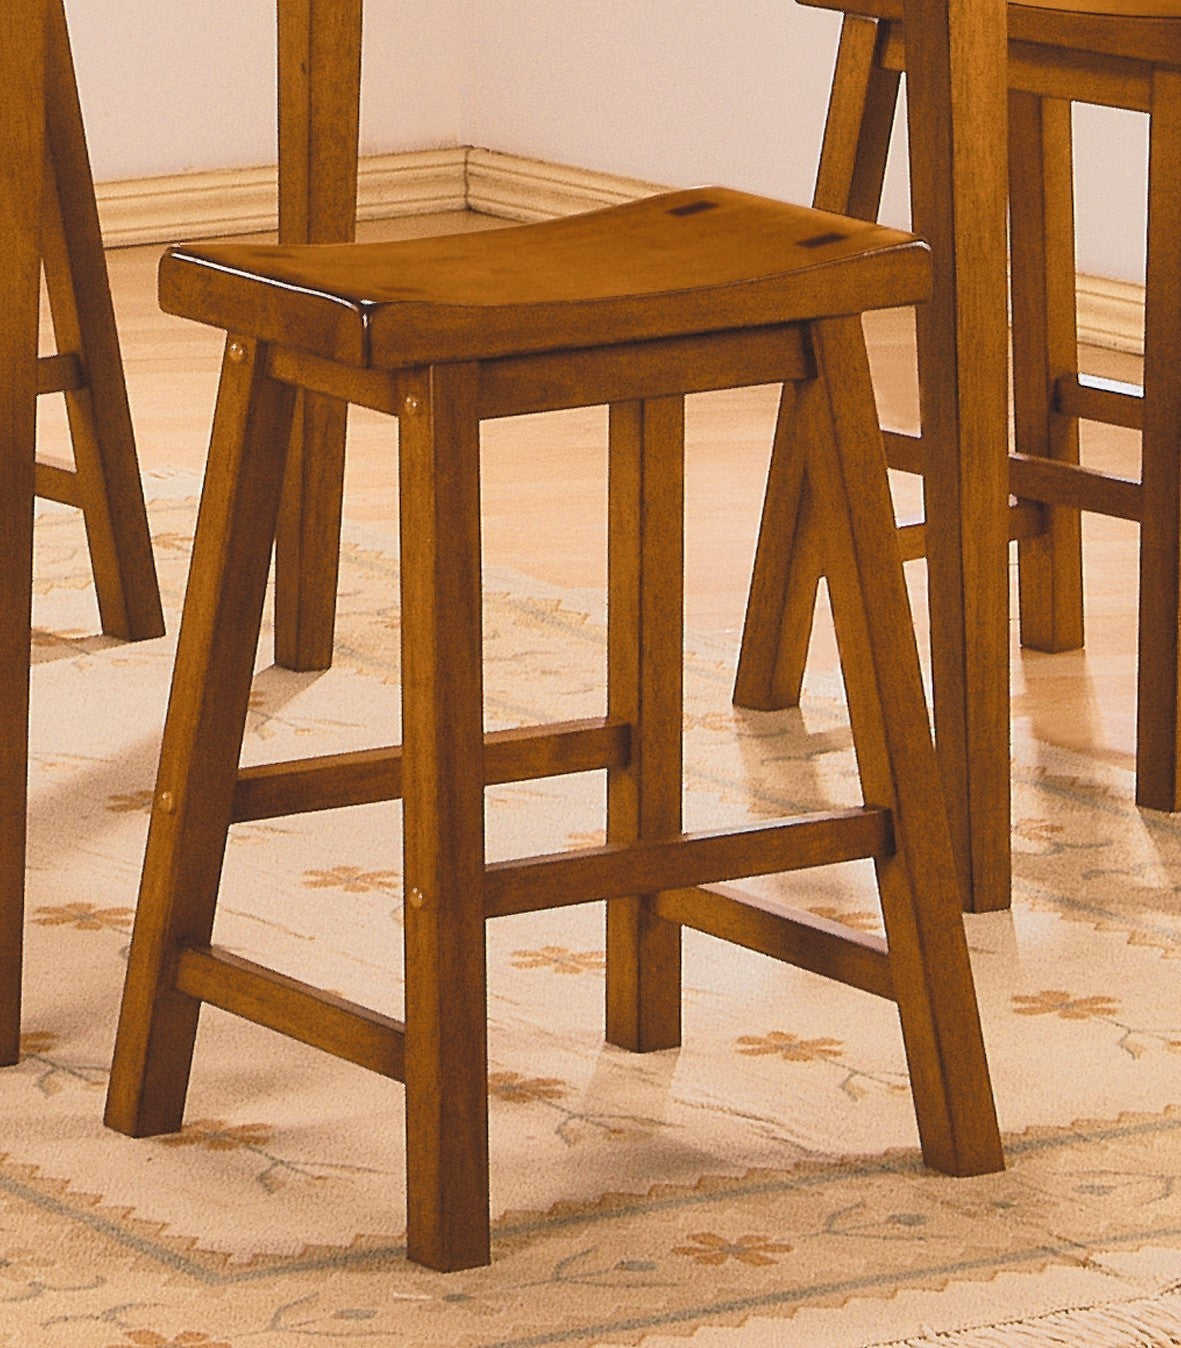 Casual Dining 24 inch Counter Height Stools 2pc Set oak-dining room-solid wood